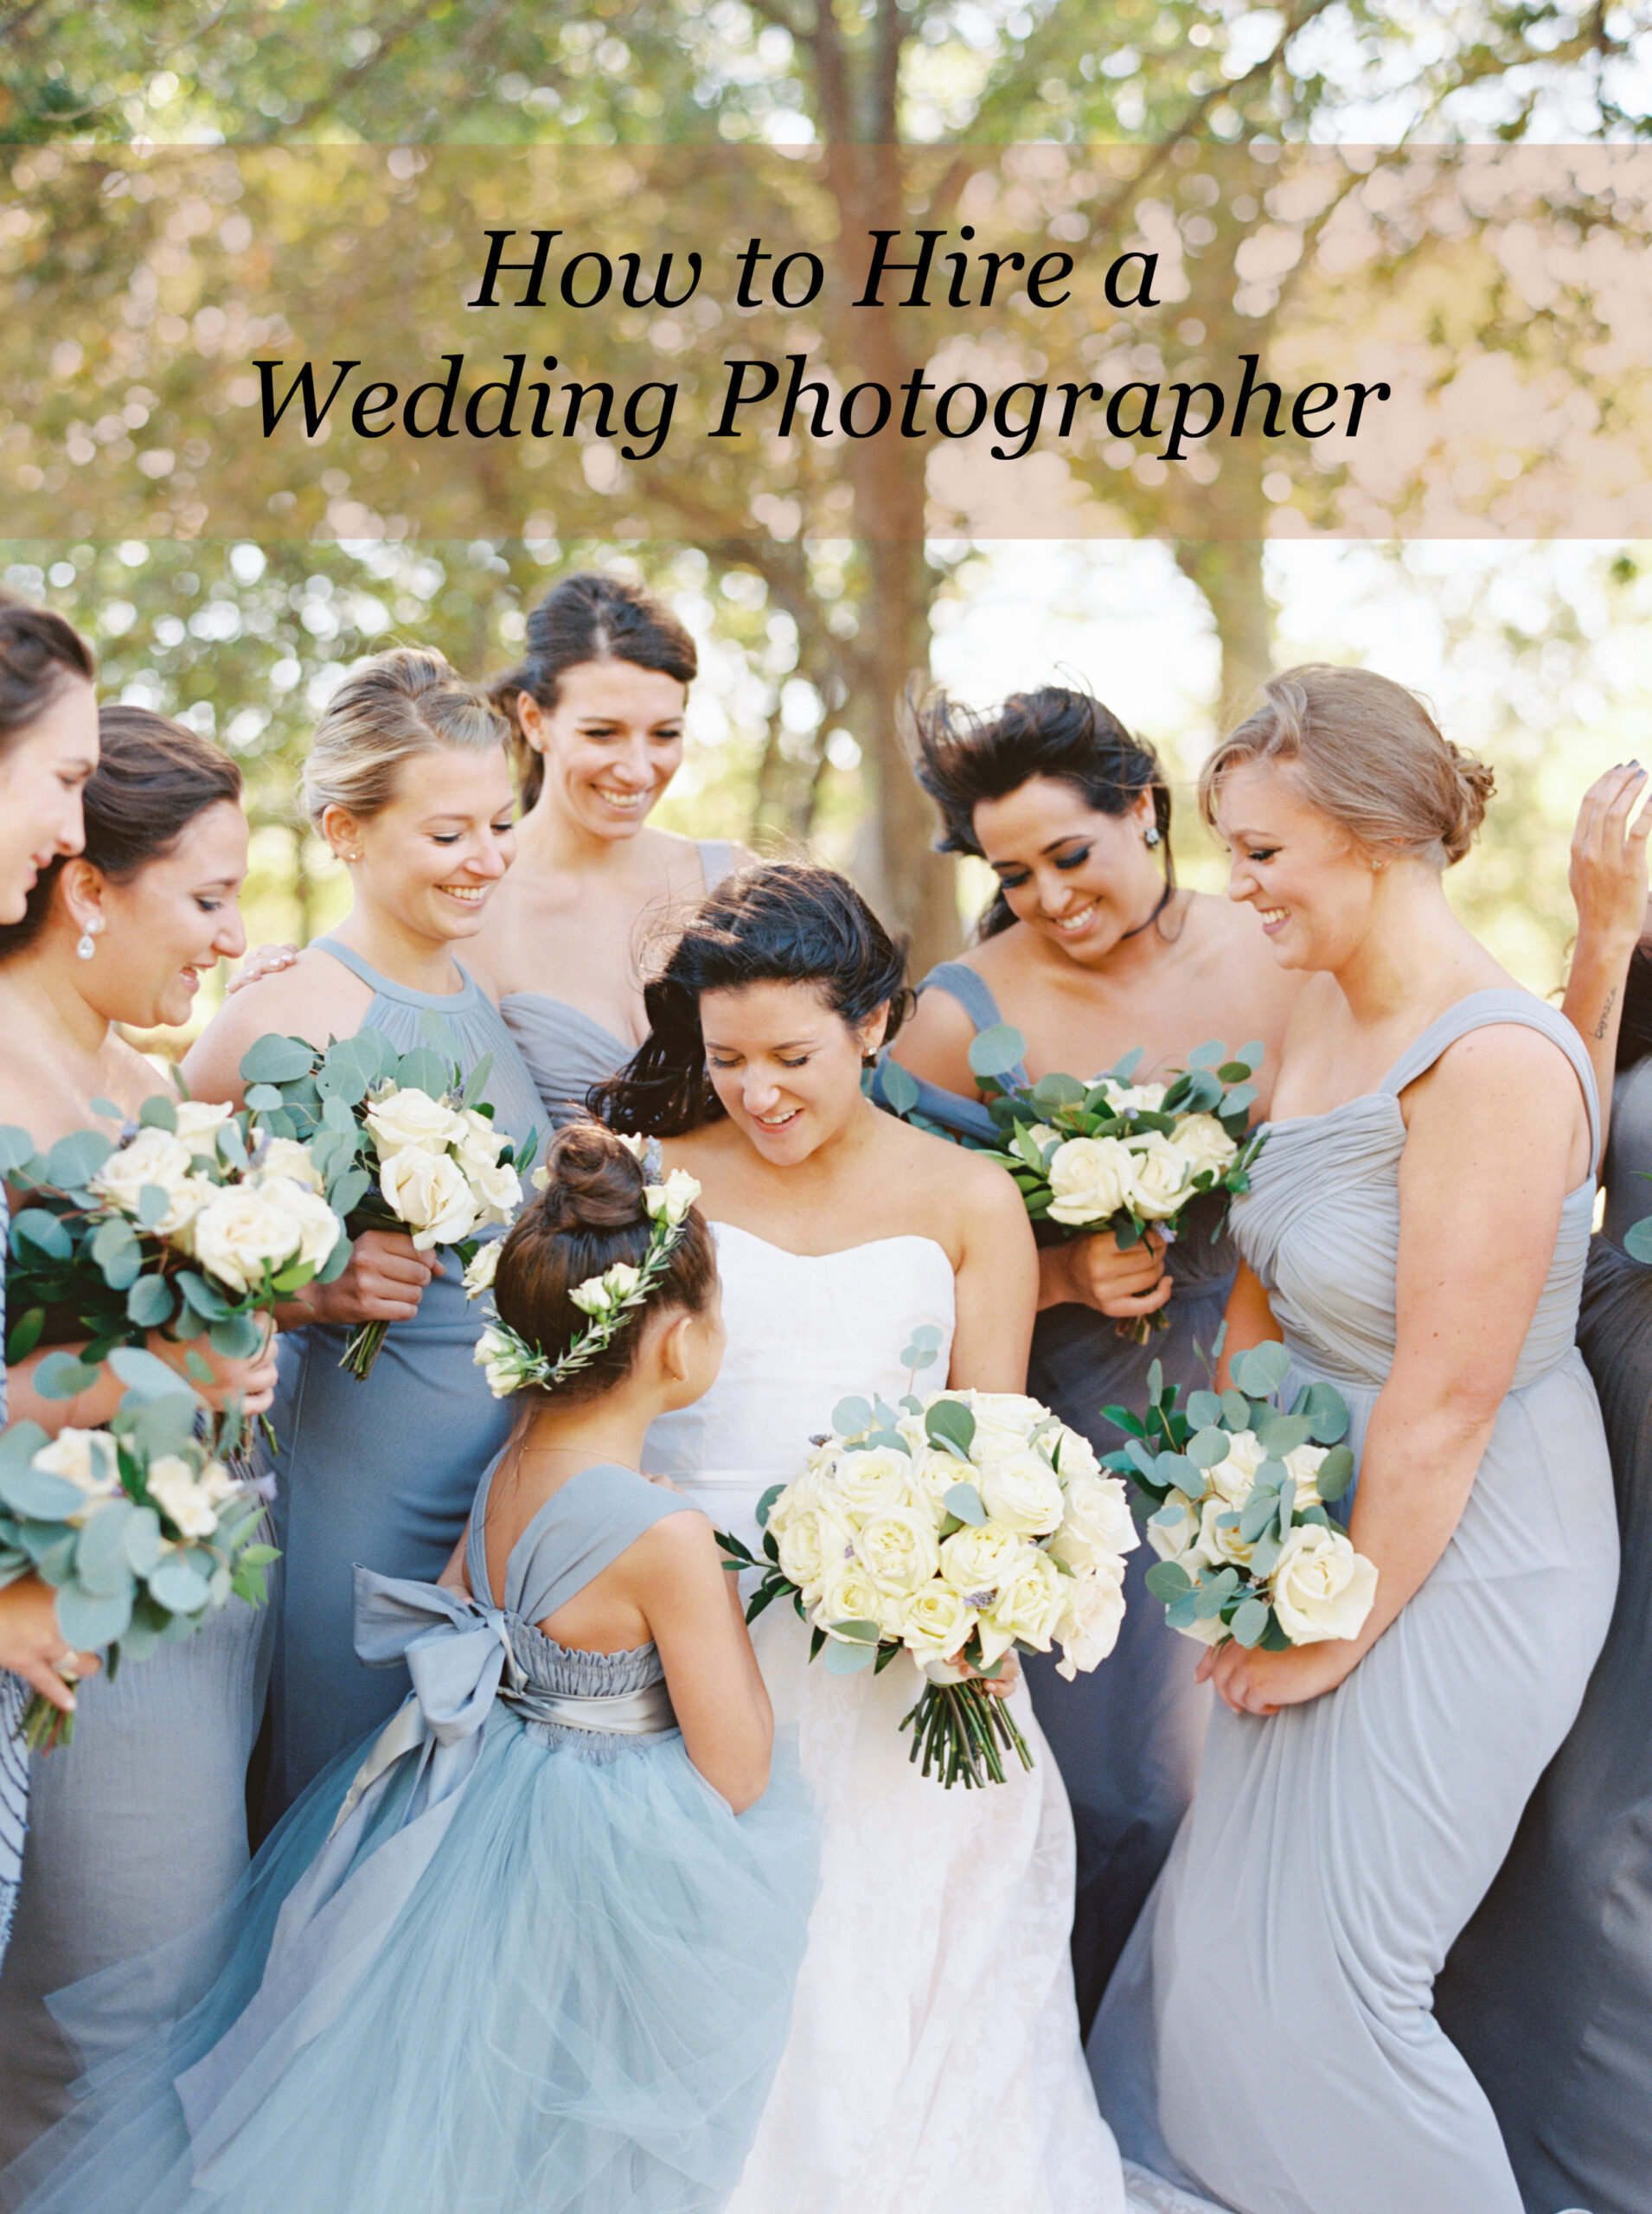 How to hire a wedding photographer